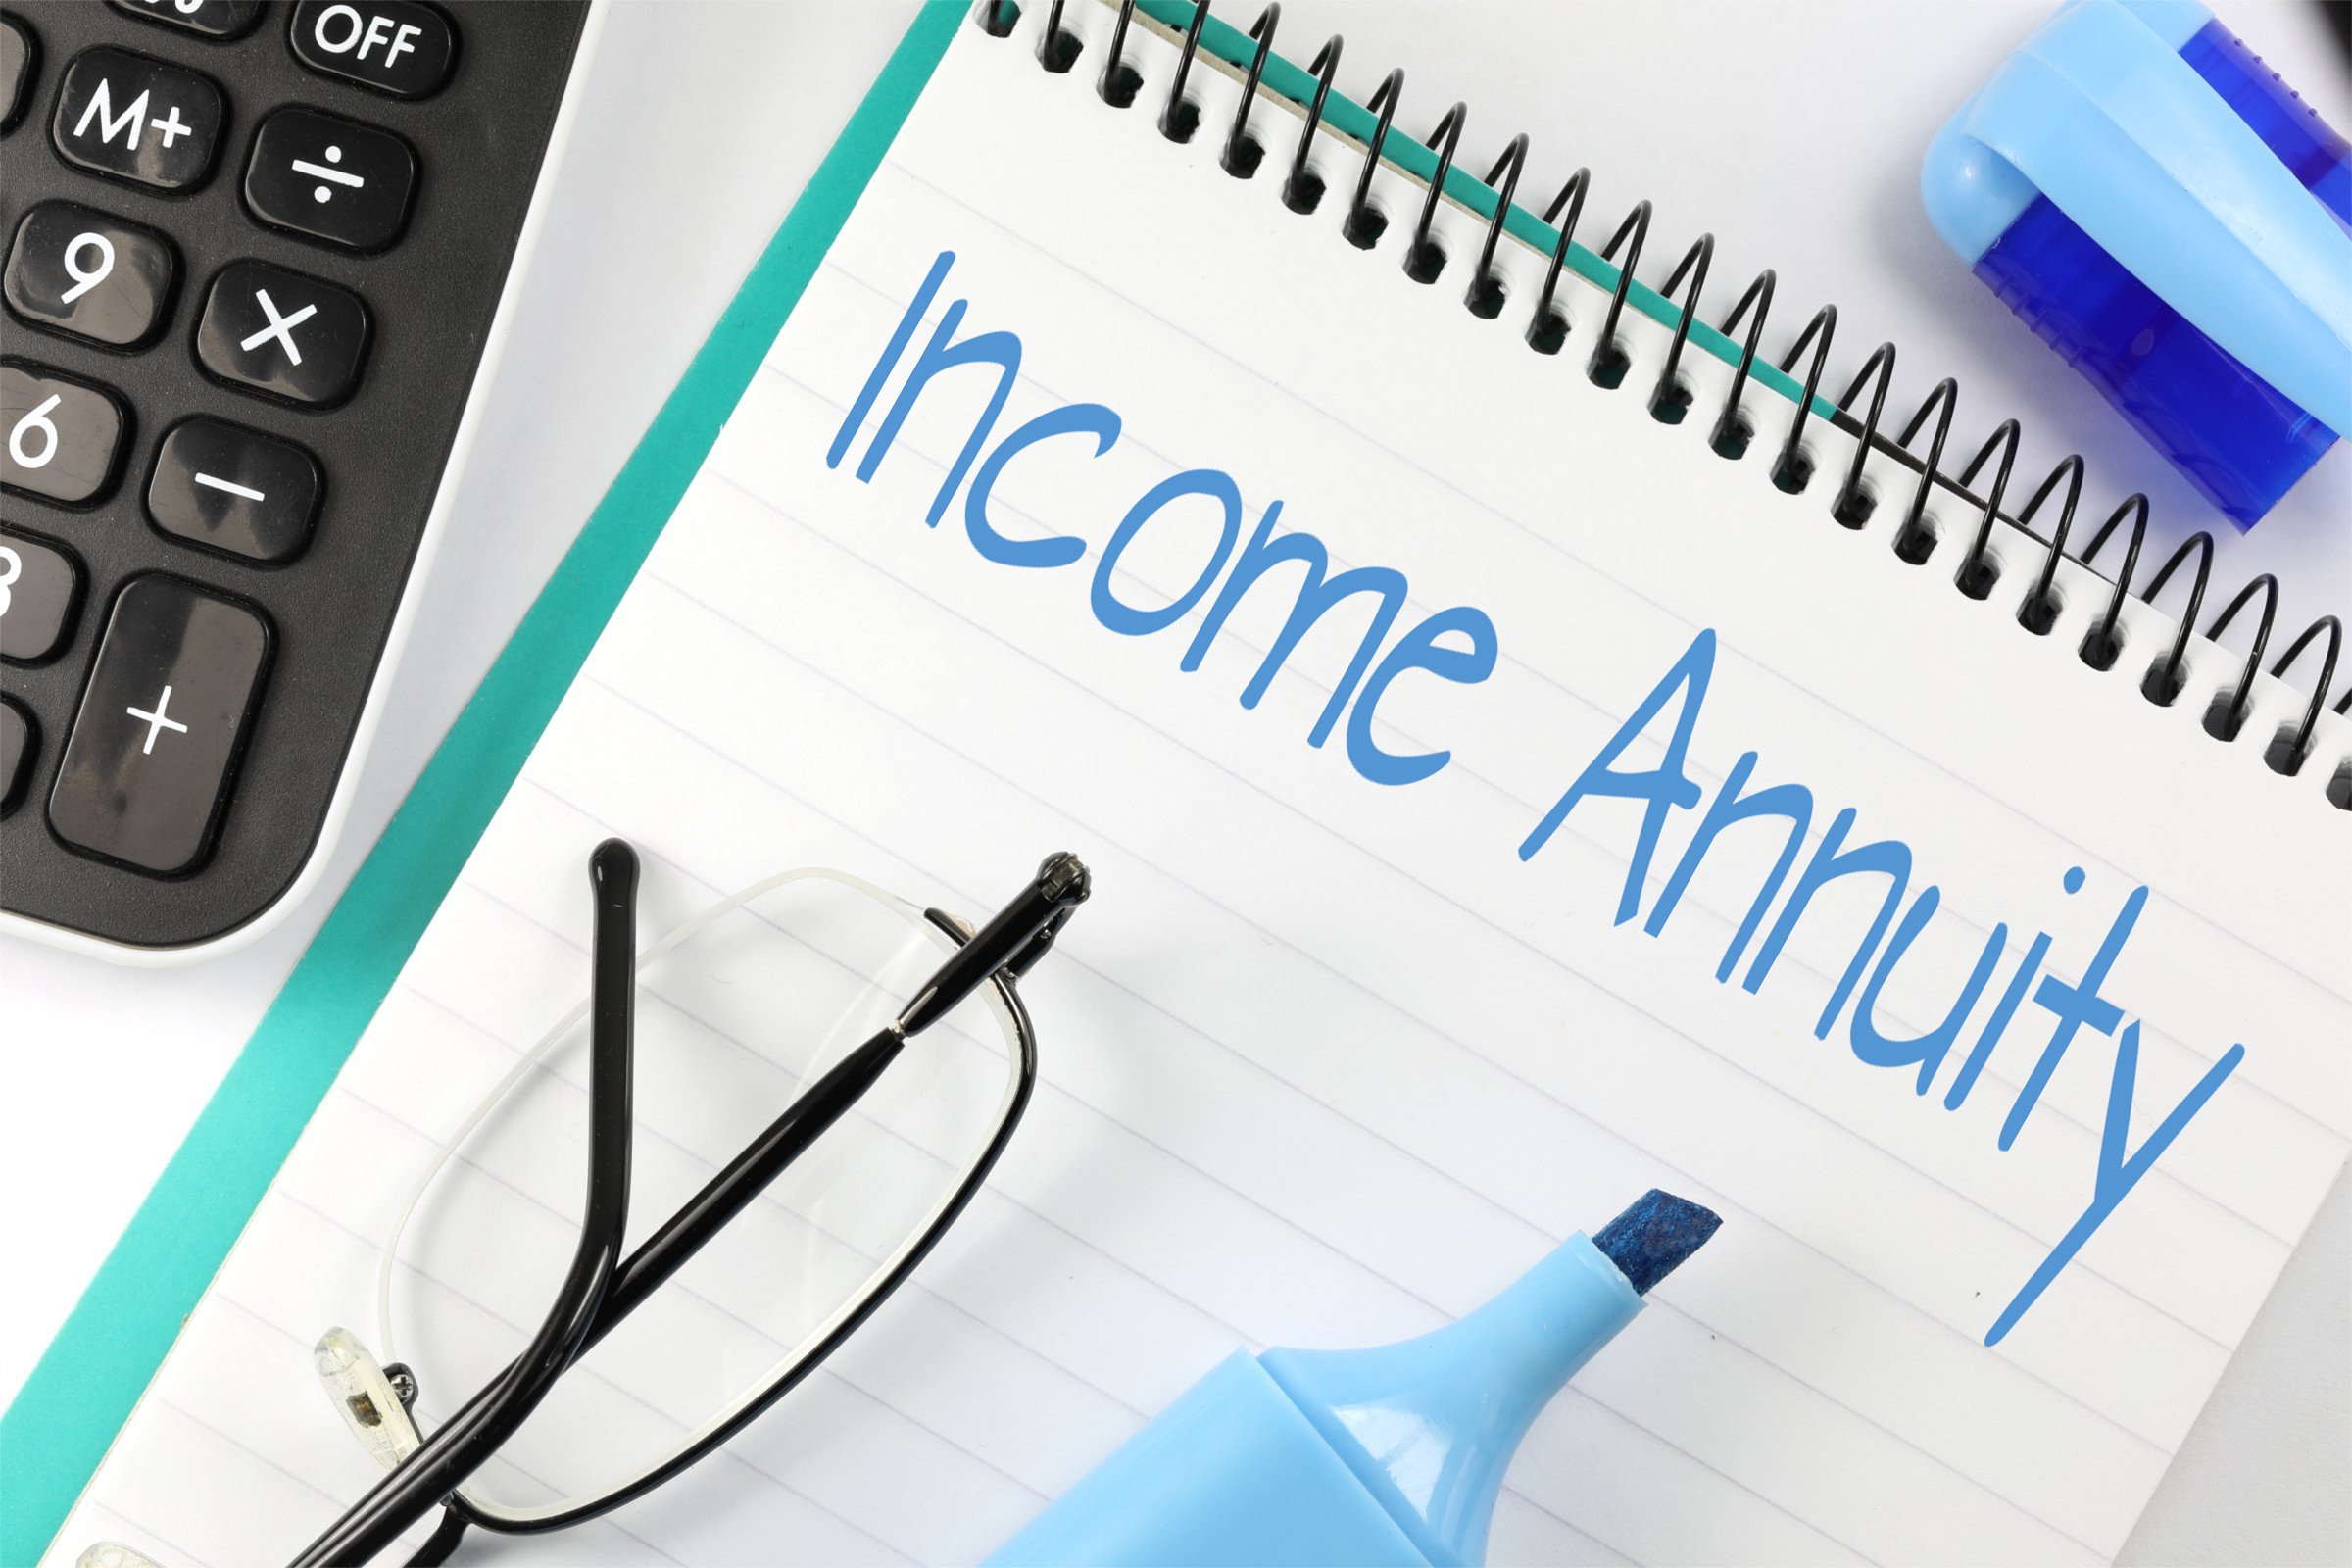 income annuity